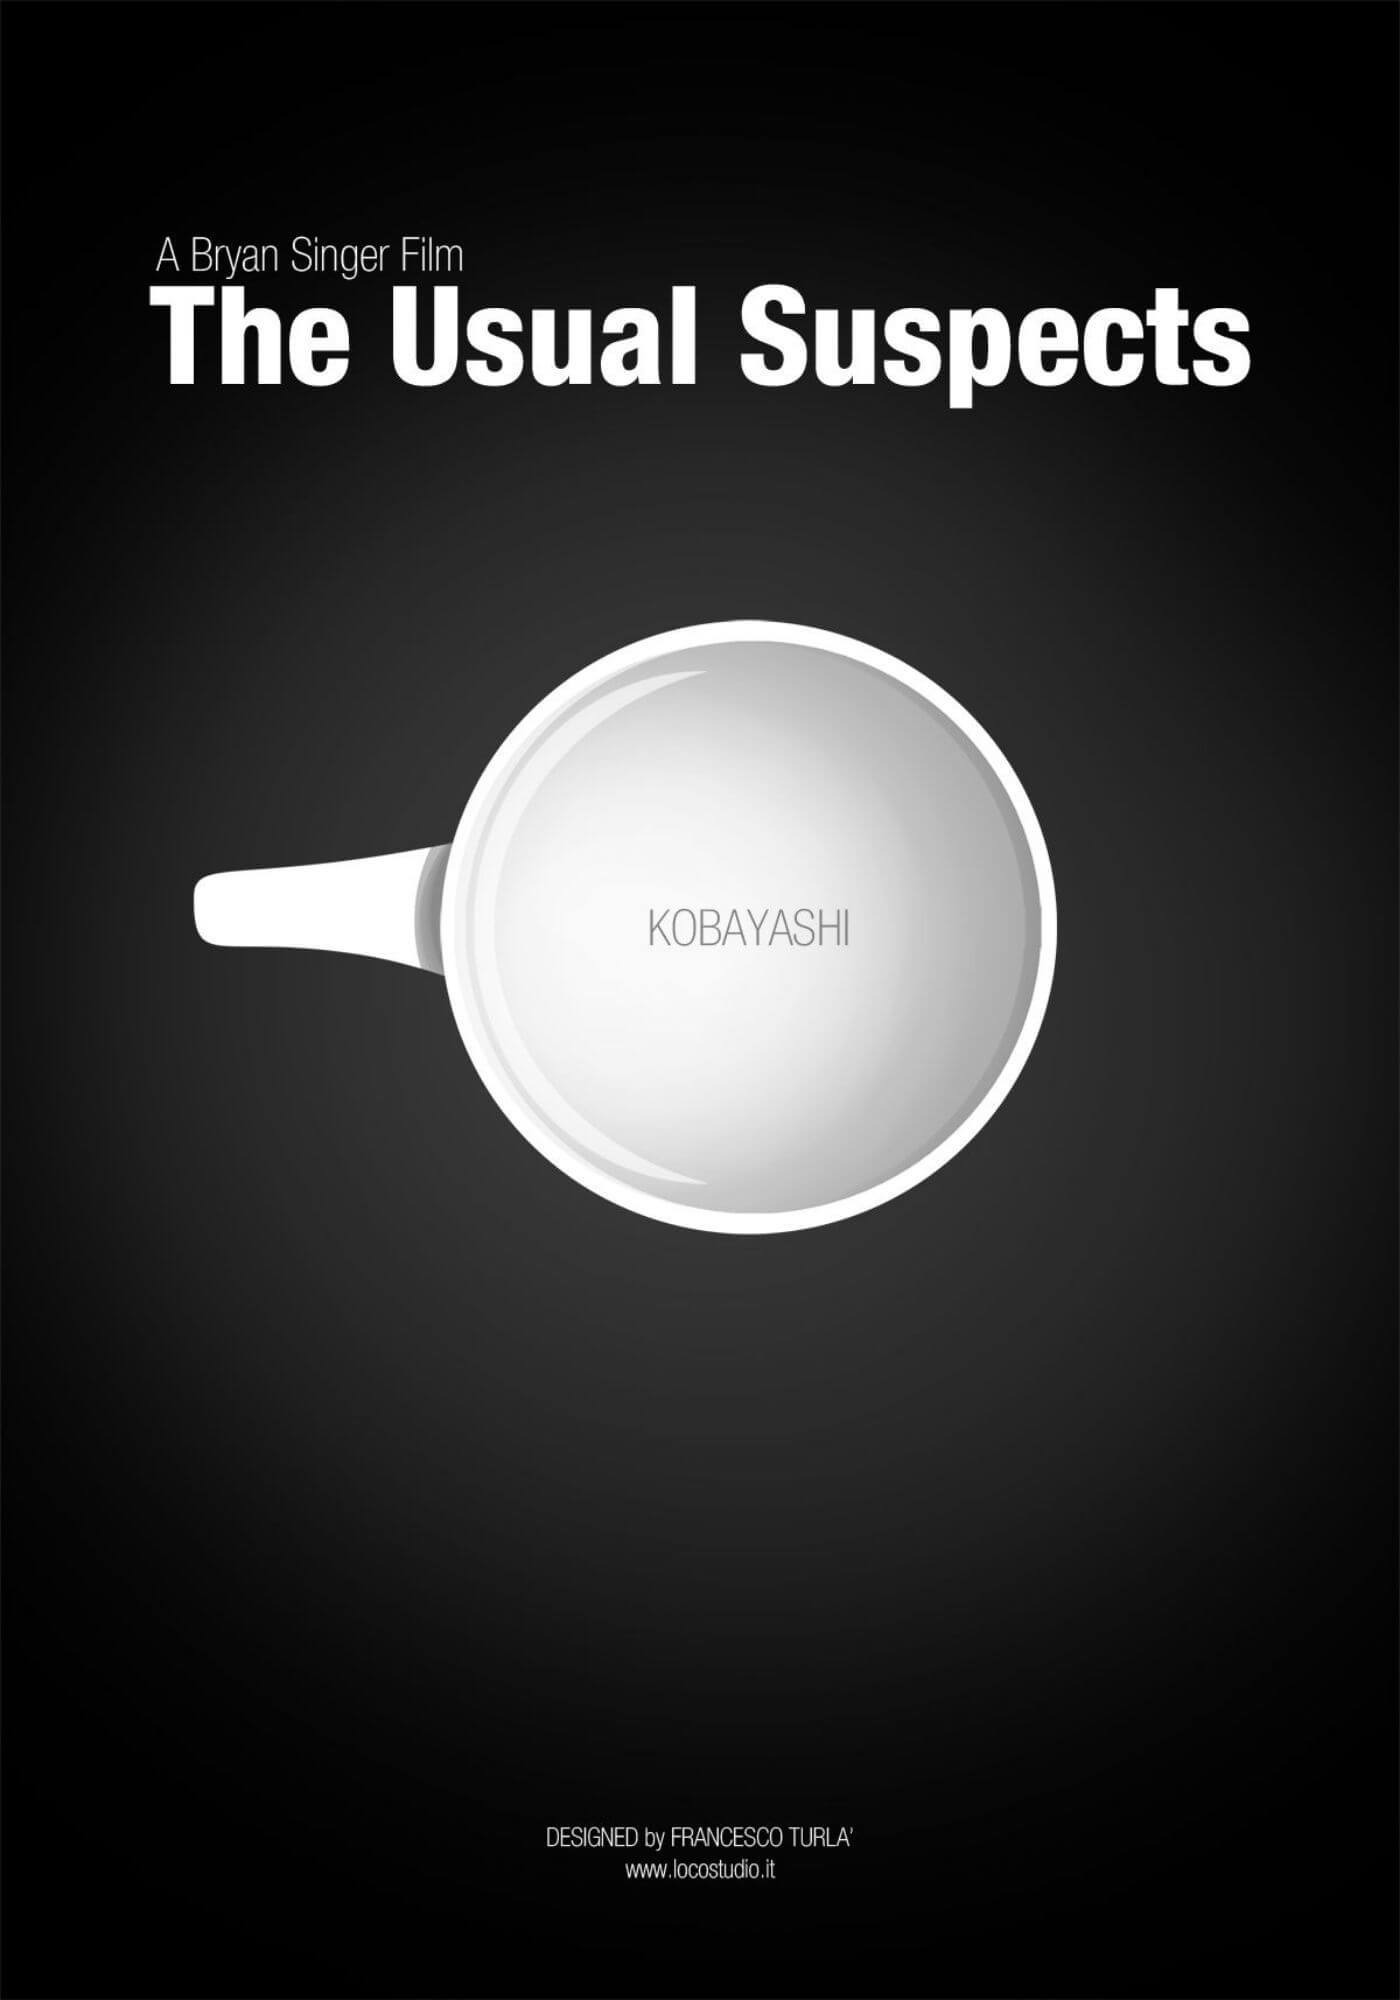 General 1400x2000 The Usual Suspects crime movie poster digital art simple background text portrait display watermarked